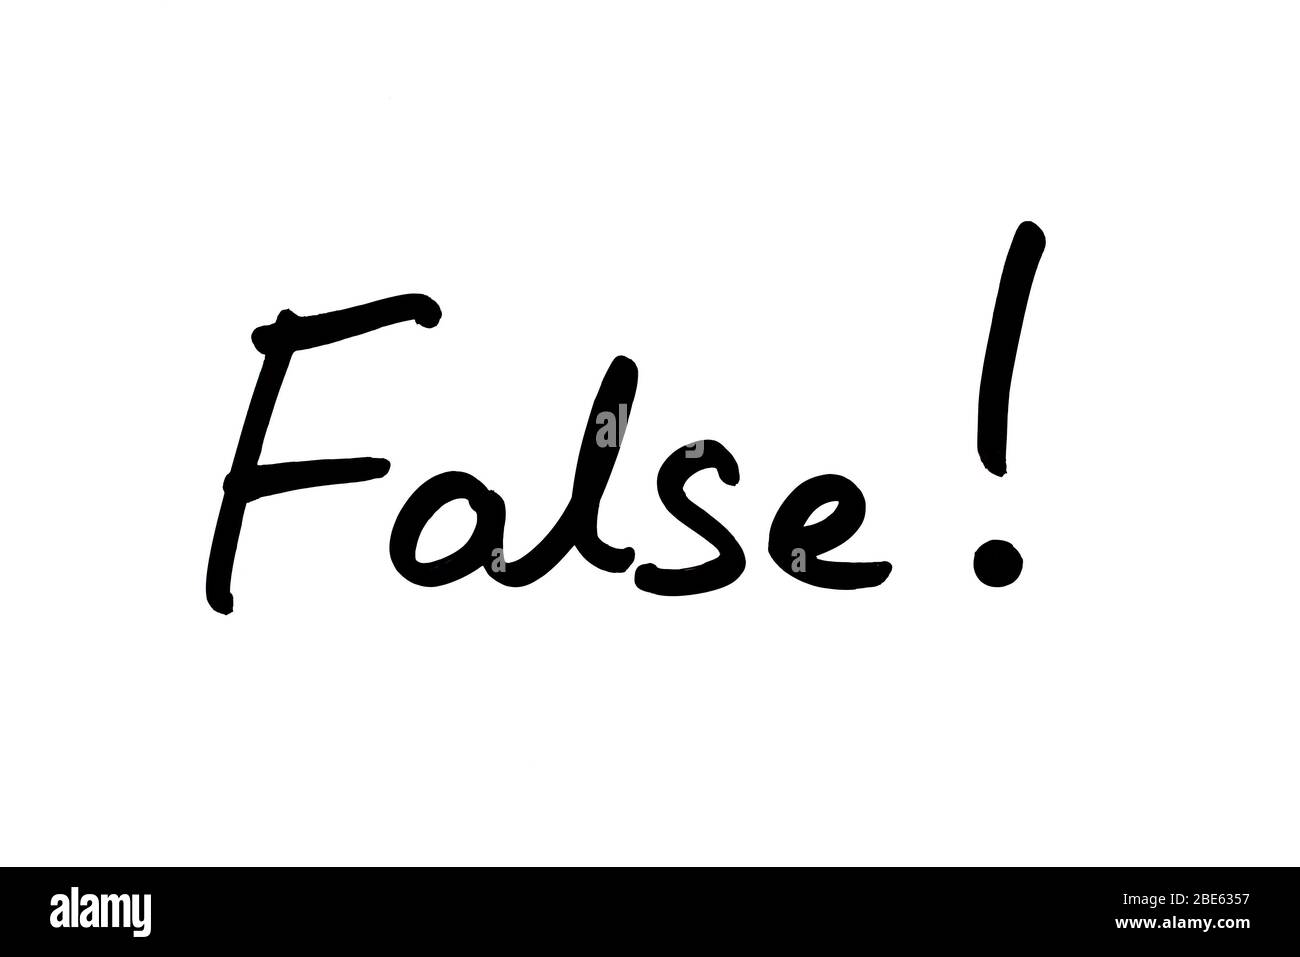 The word False! handwritten on a white background. Stock Photo